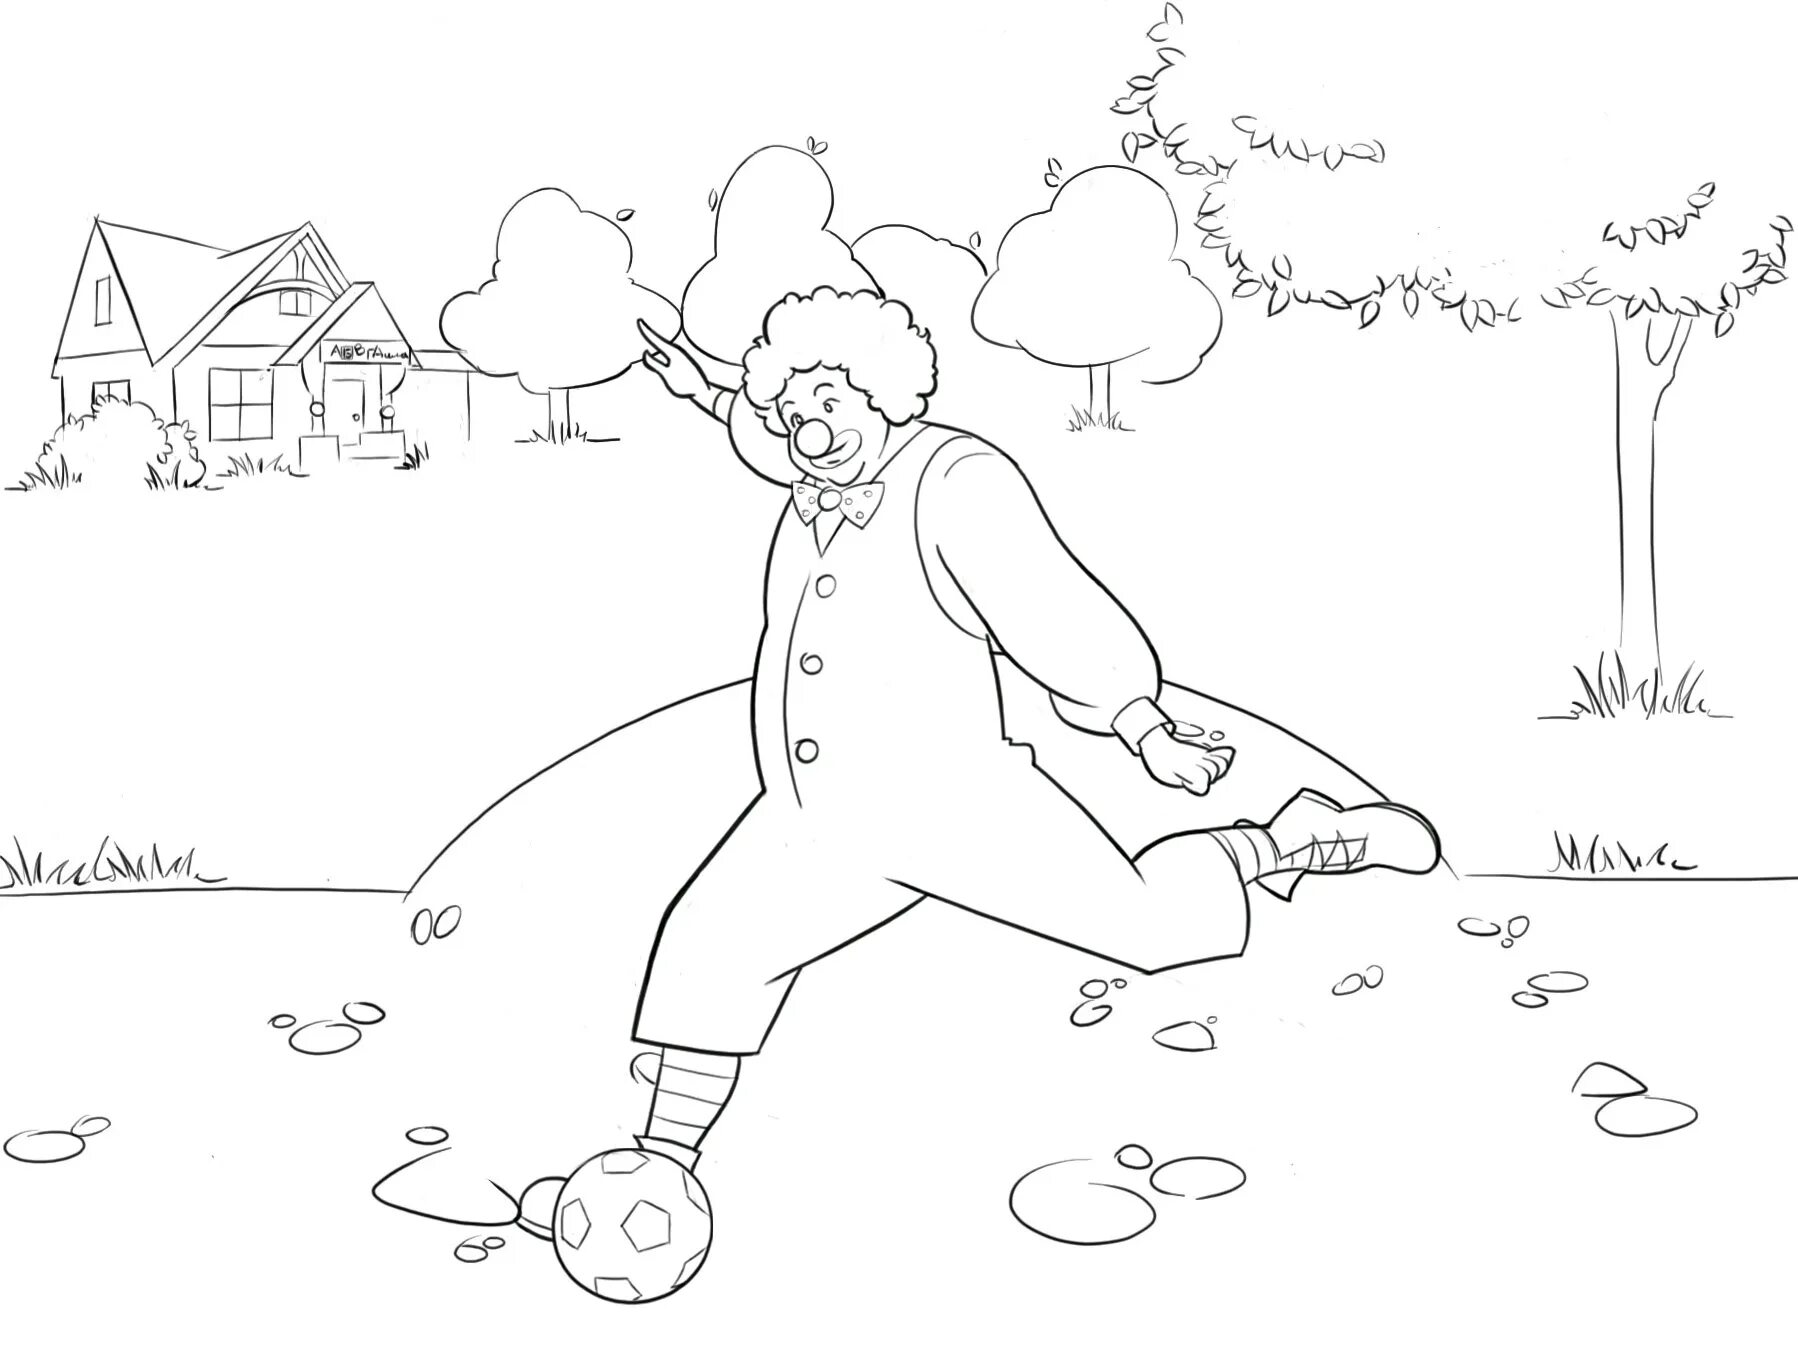 Pechkin postman coloring pages for kids